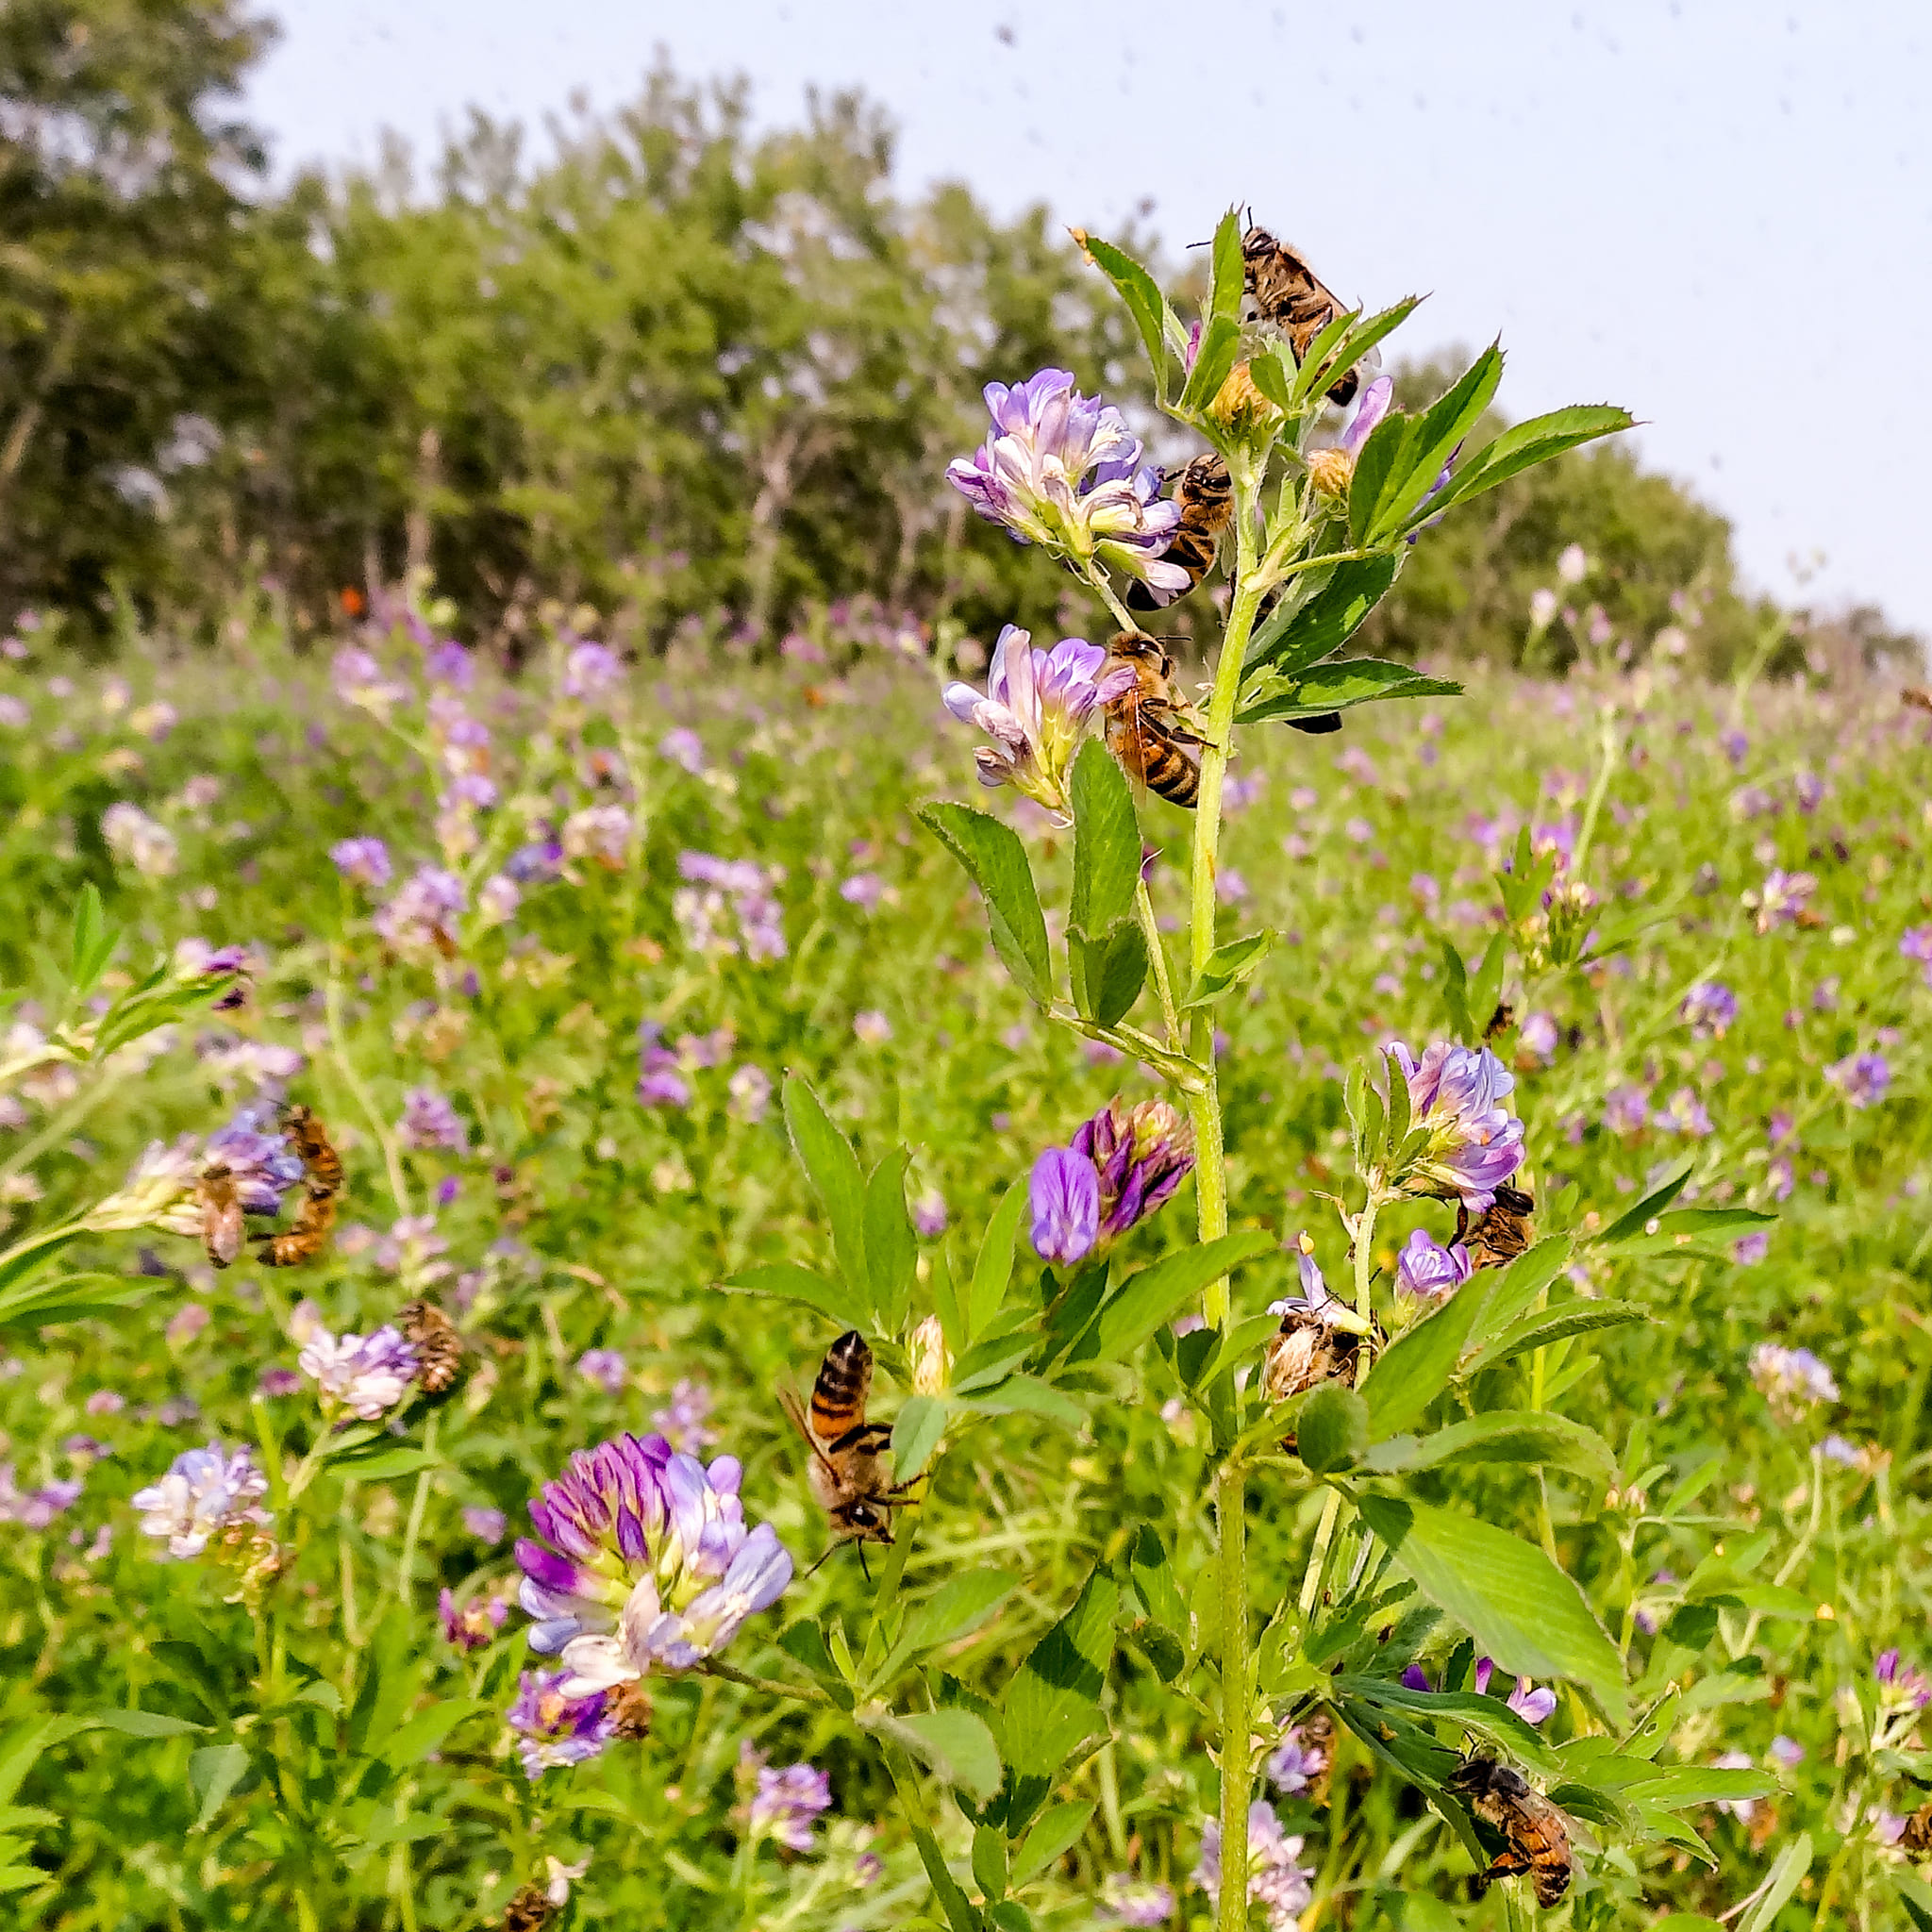 Our bees foraging in a field of alfalfa